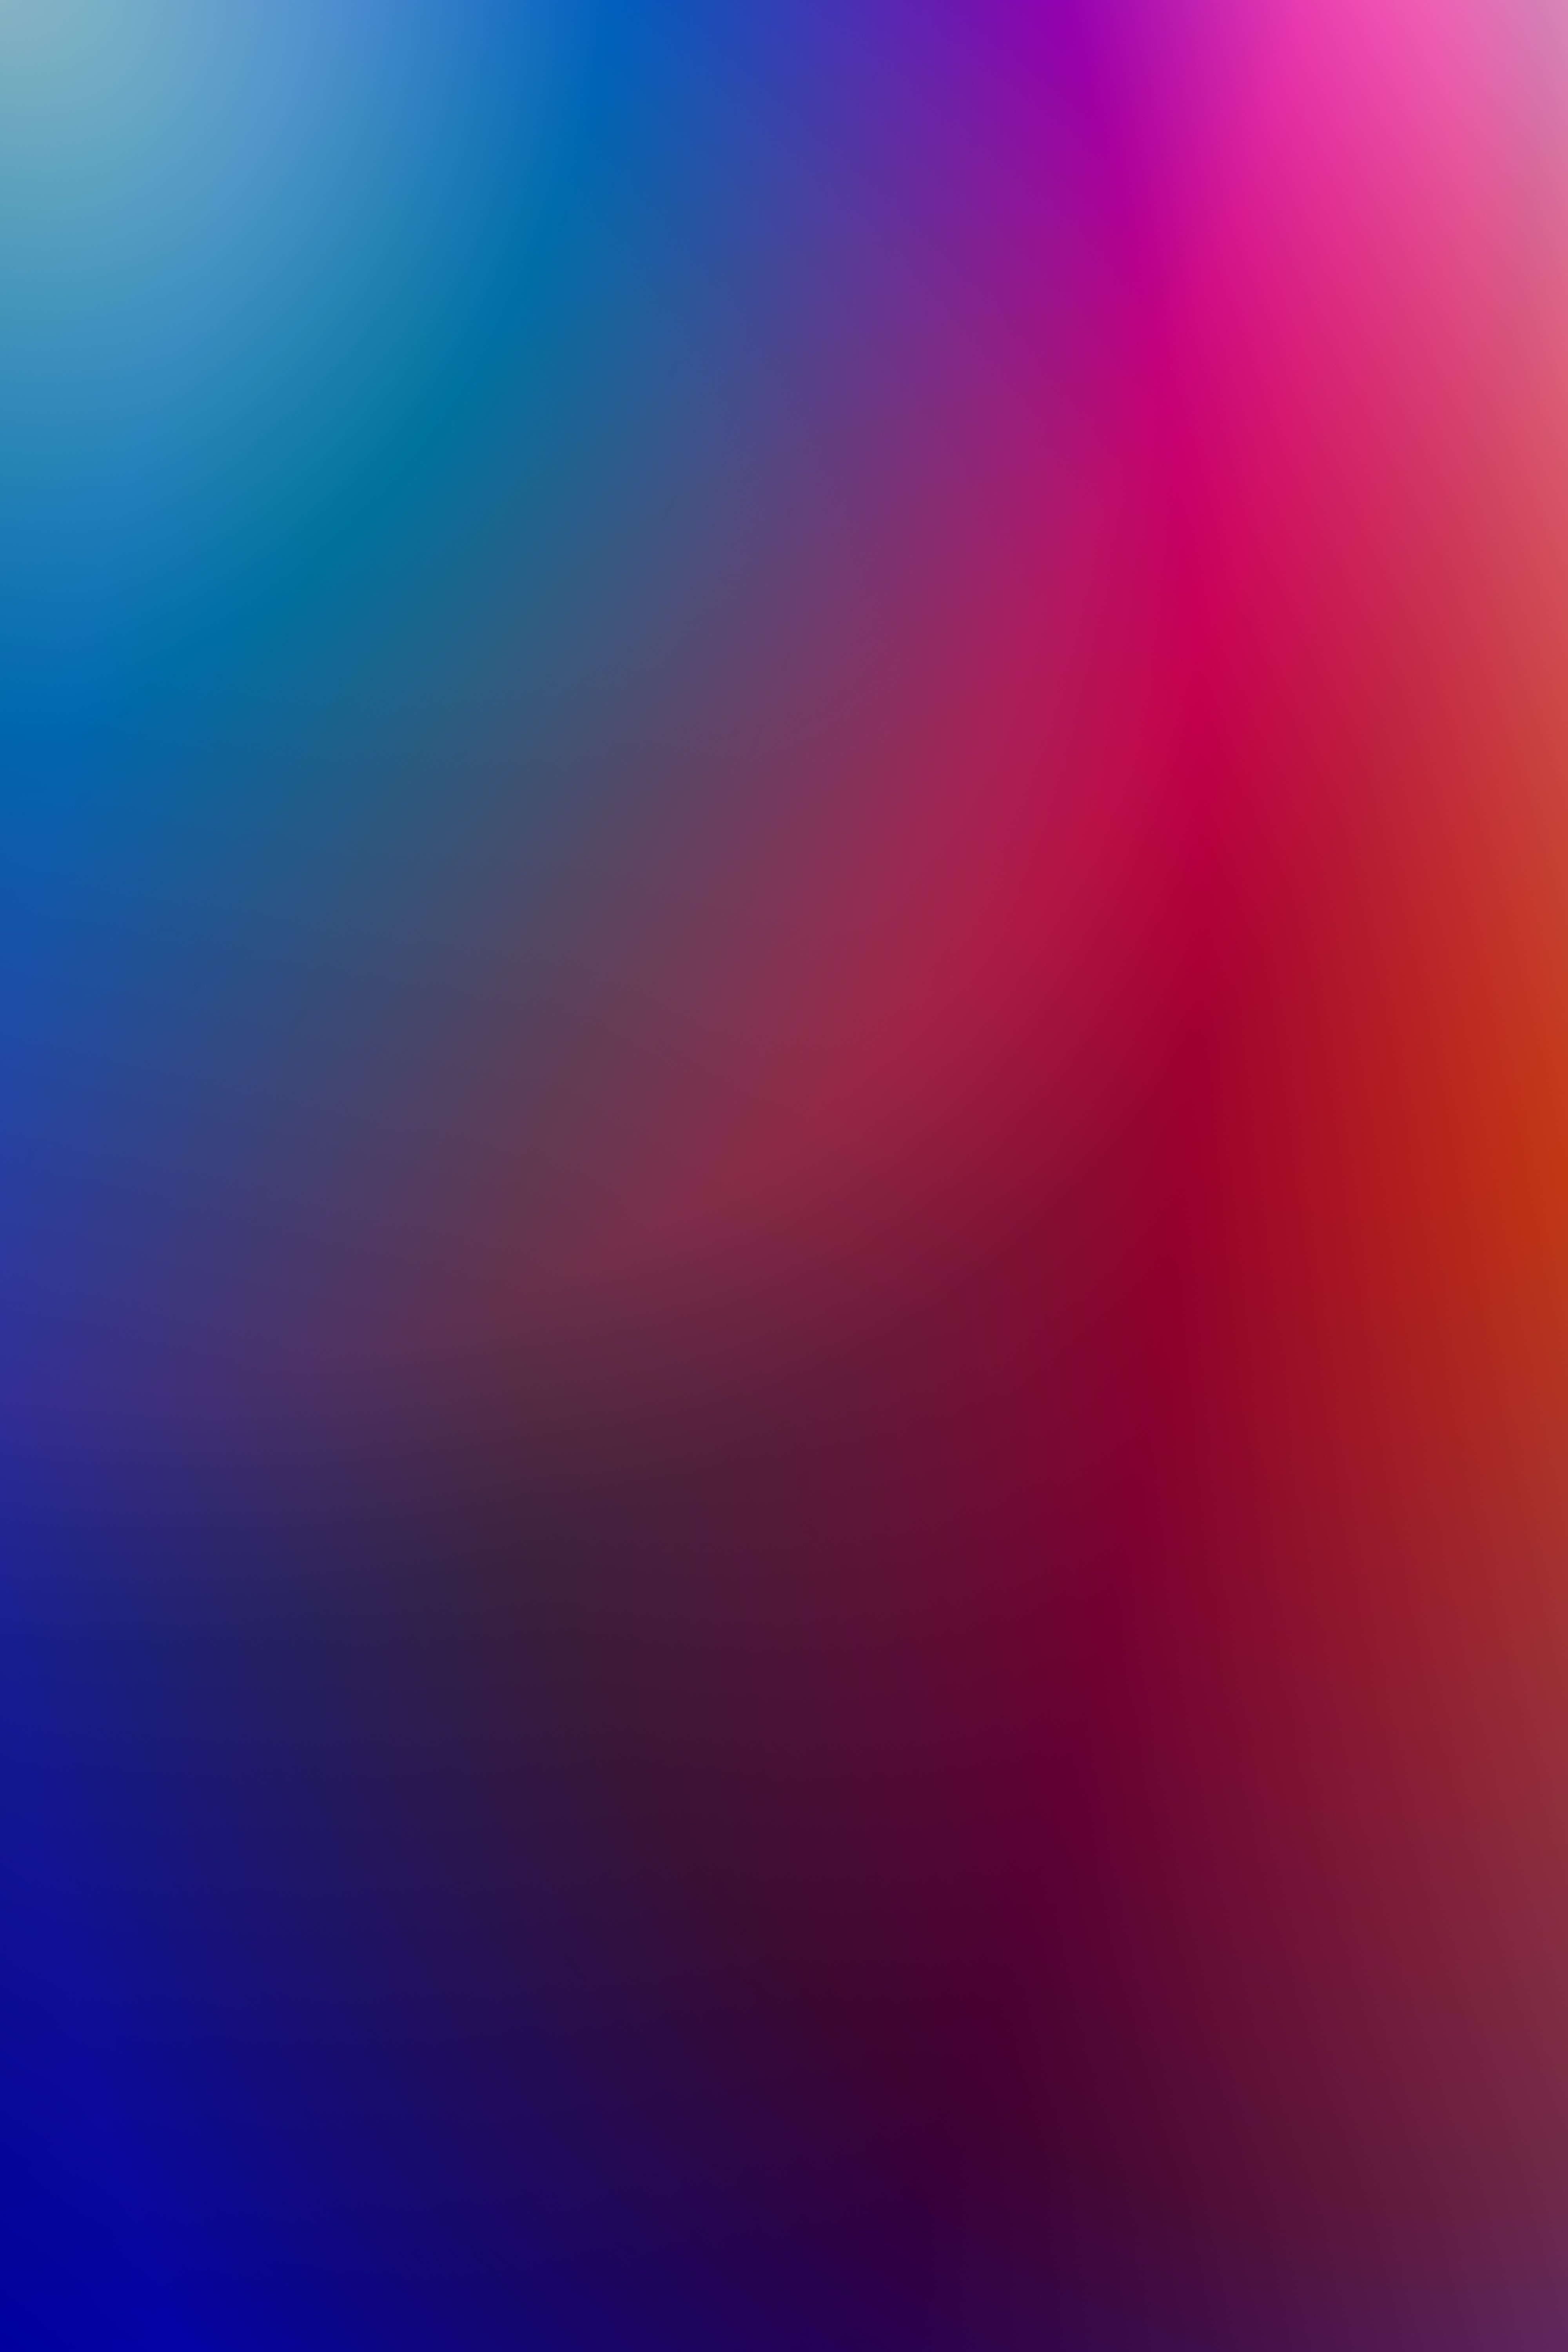 stains, abstract, multicolored, motley, spots, gradient FHD, 4K, UHD